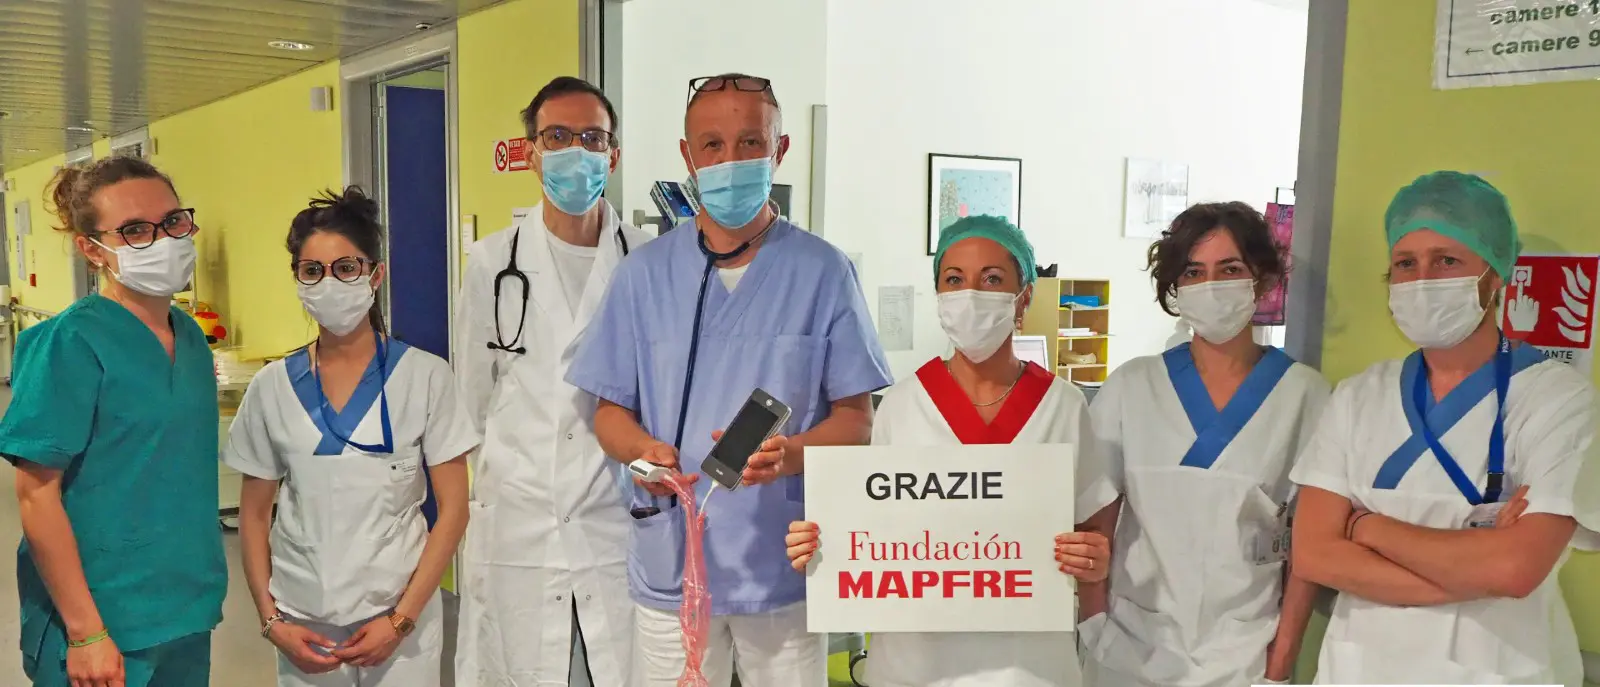 Italian healthcare system supported by Verti, thanks to Fundación MAPFRE